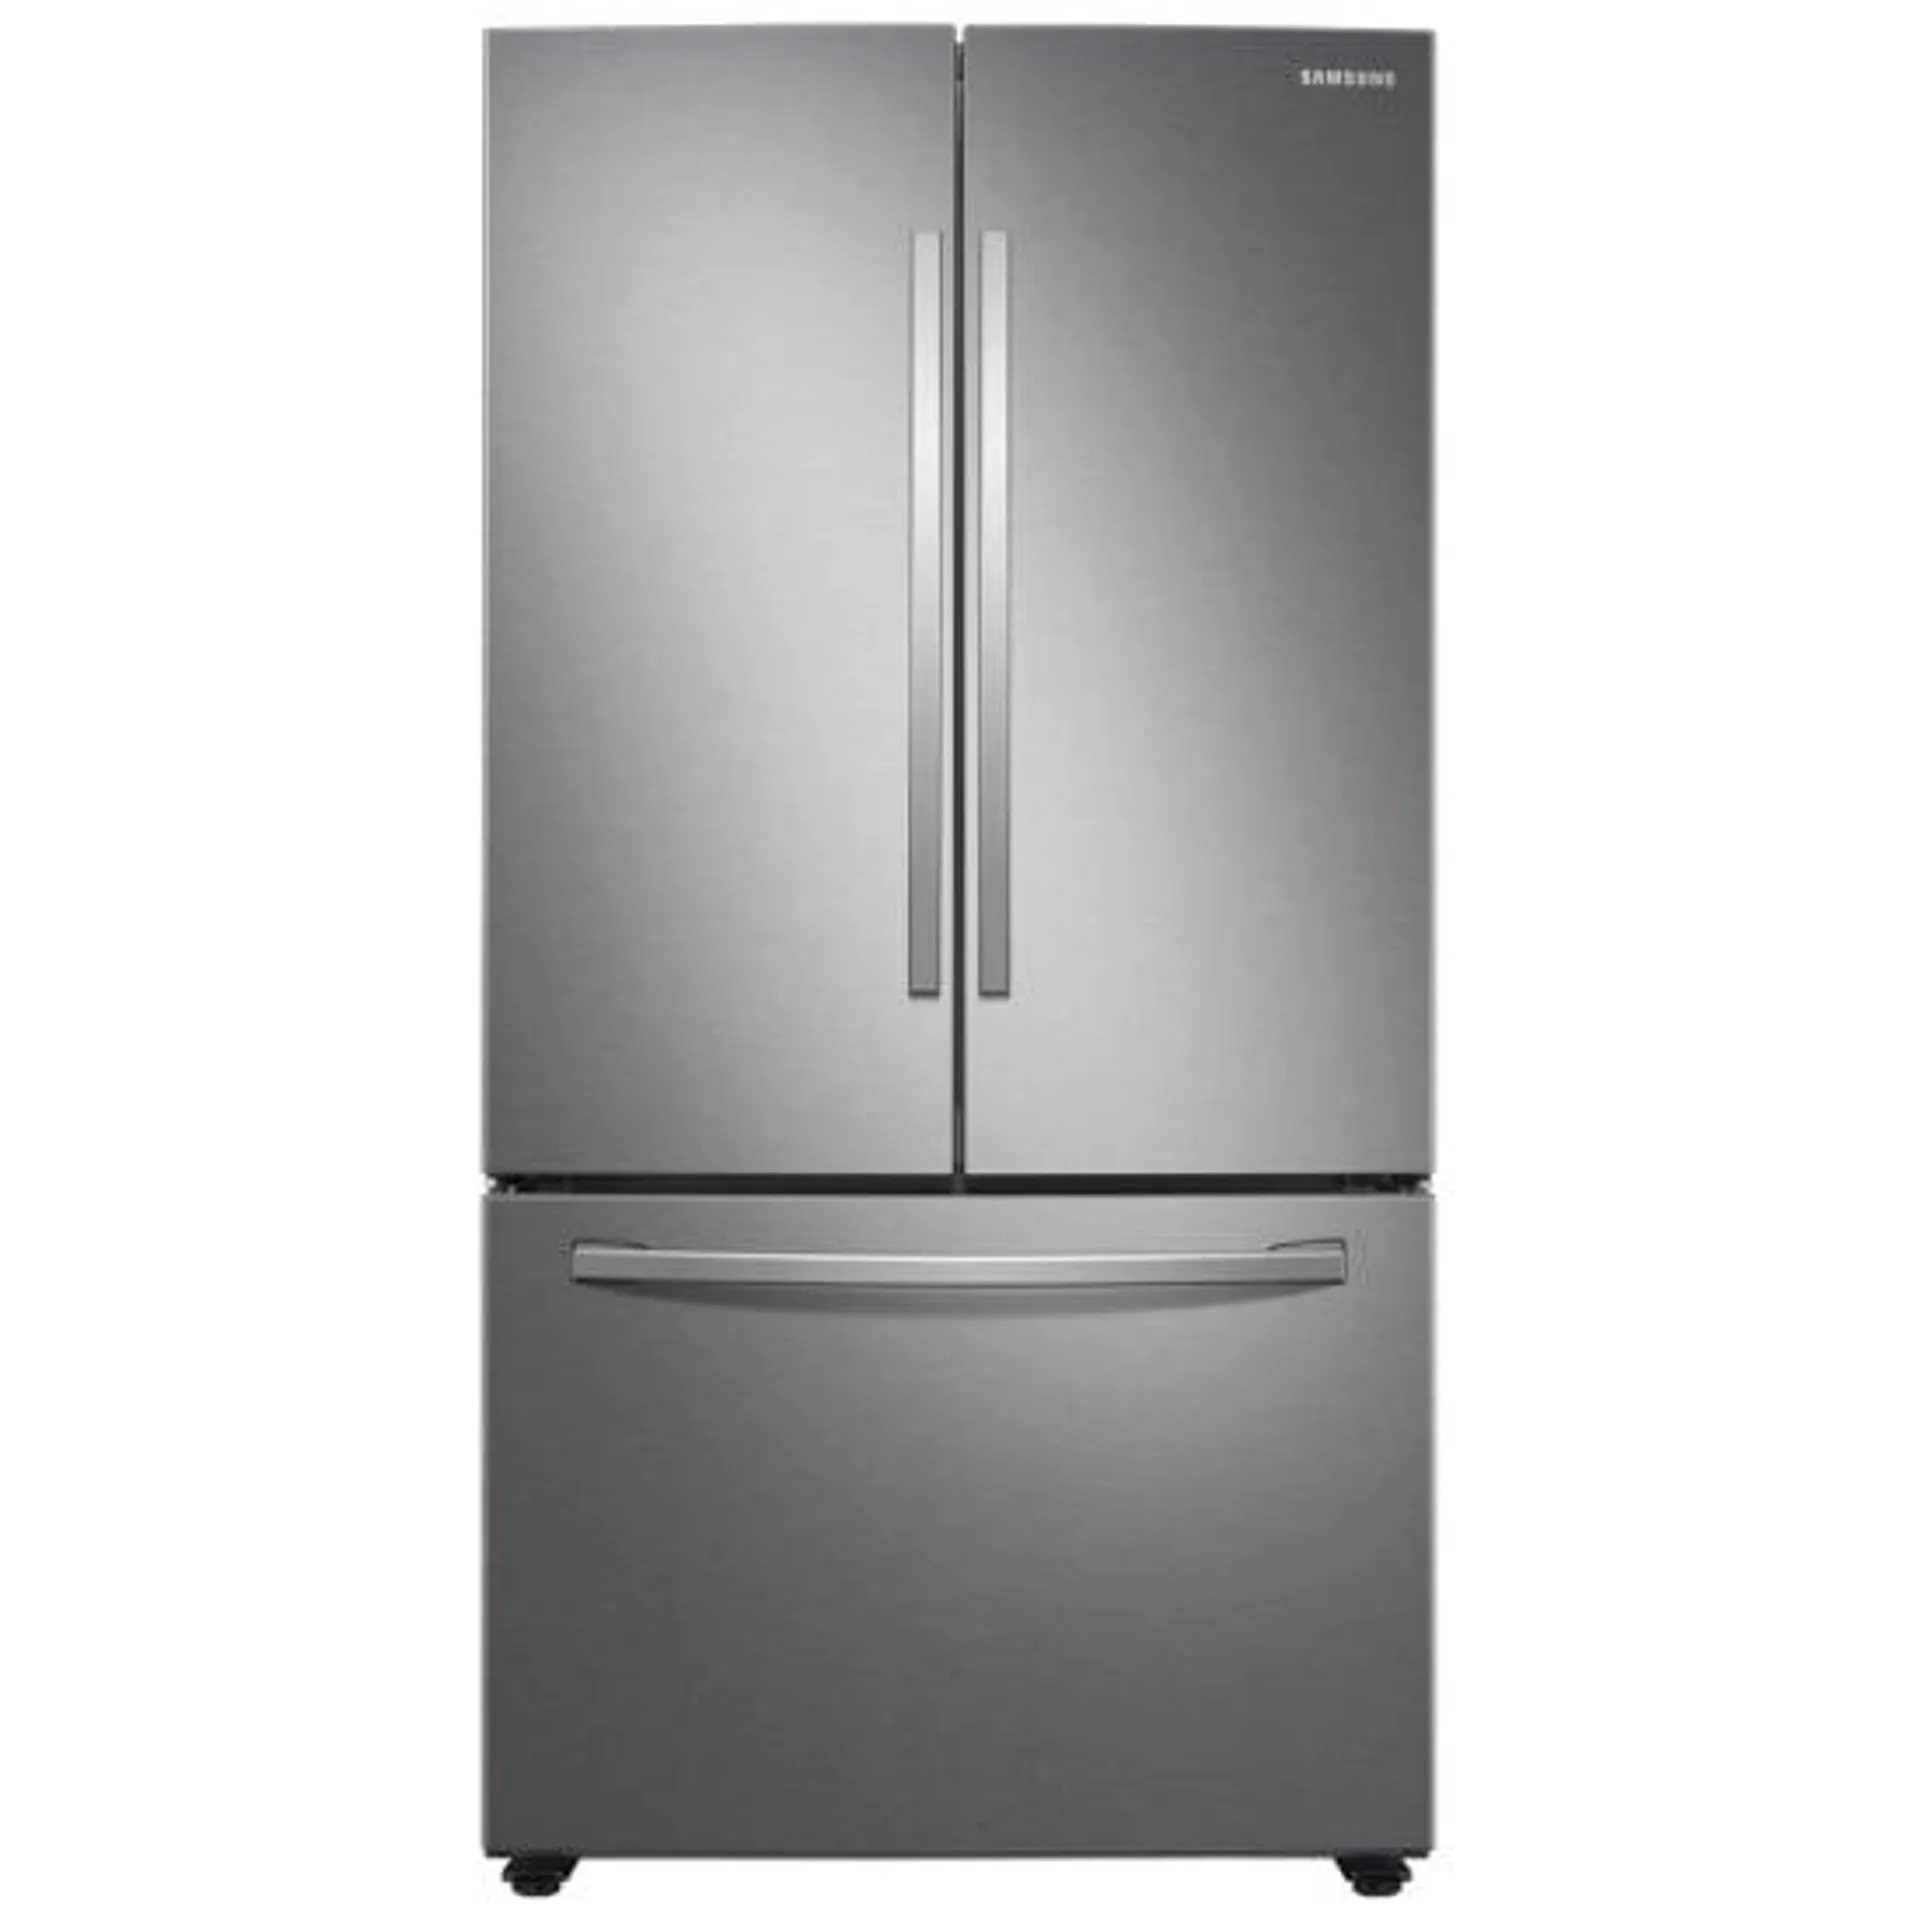 Samsung RF28T5A01SR - RF28T5A01SR/AA French Door Refrigerator, 36" Width, ENERGY STAR Certified, 28.2 cu. ft. Capacity, Stainless Steel colour All-Around Cooling, Wide-open Pantry, similar to